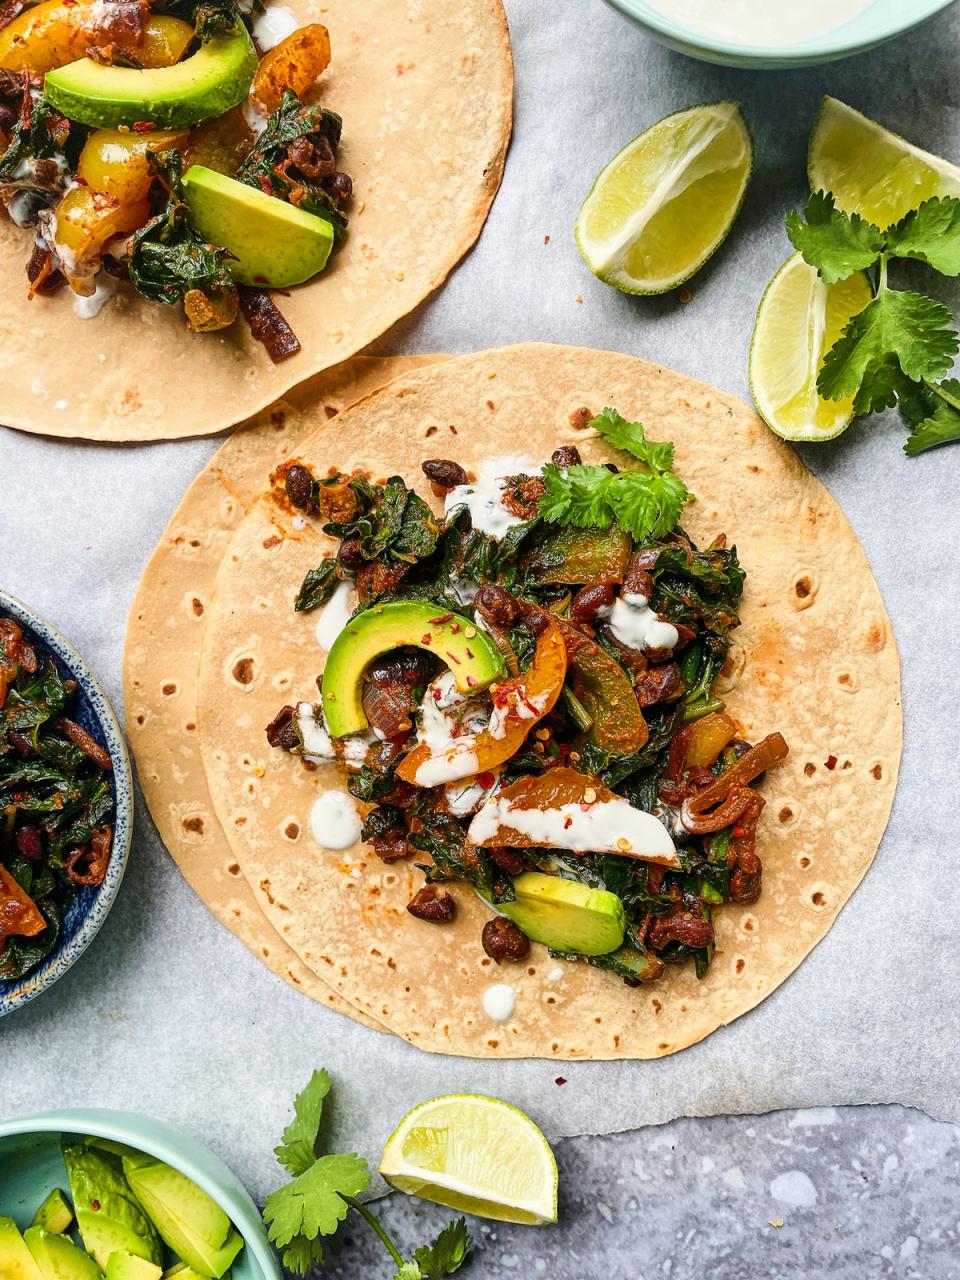 Made with black beans and juicy avocadoes, these fajitas are suitable for vegetarians and a source of fibre and protein (Discover Great Veg)